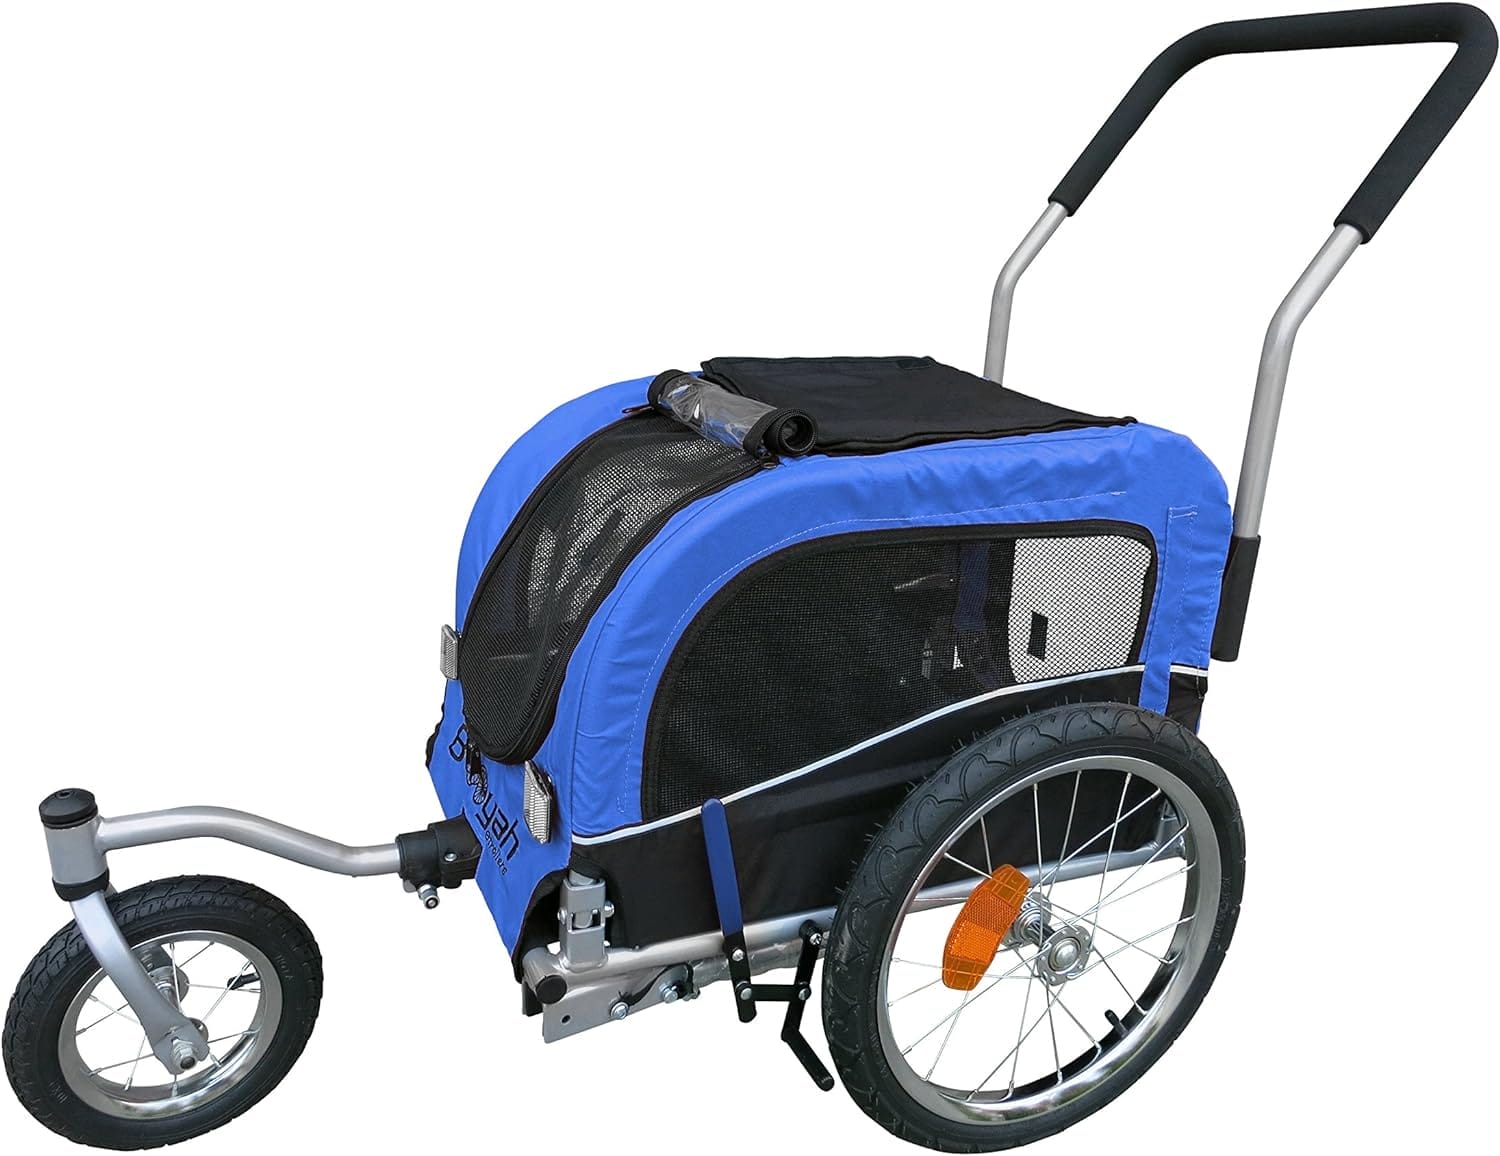 Booyah Dog Stroller and Bicycle Trailer Review